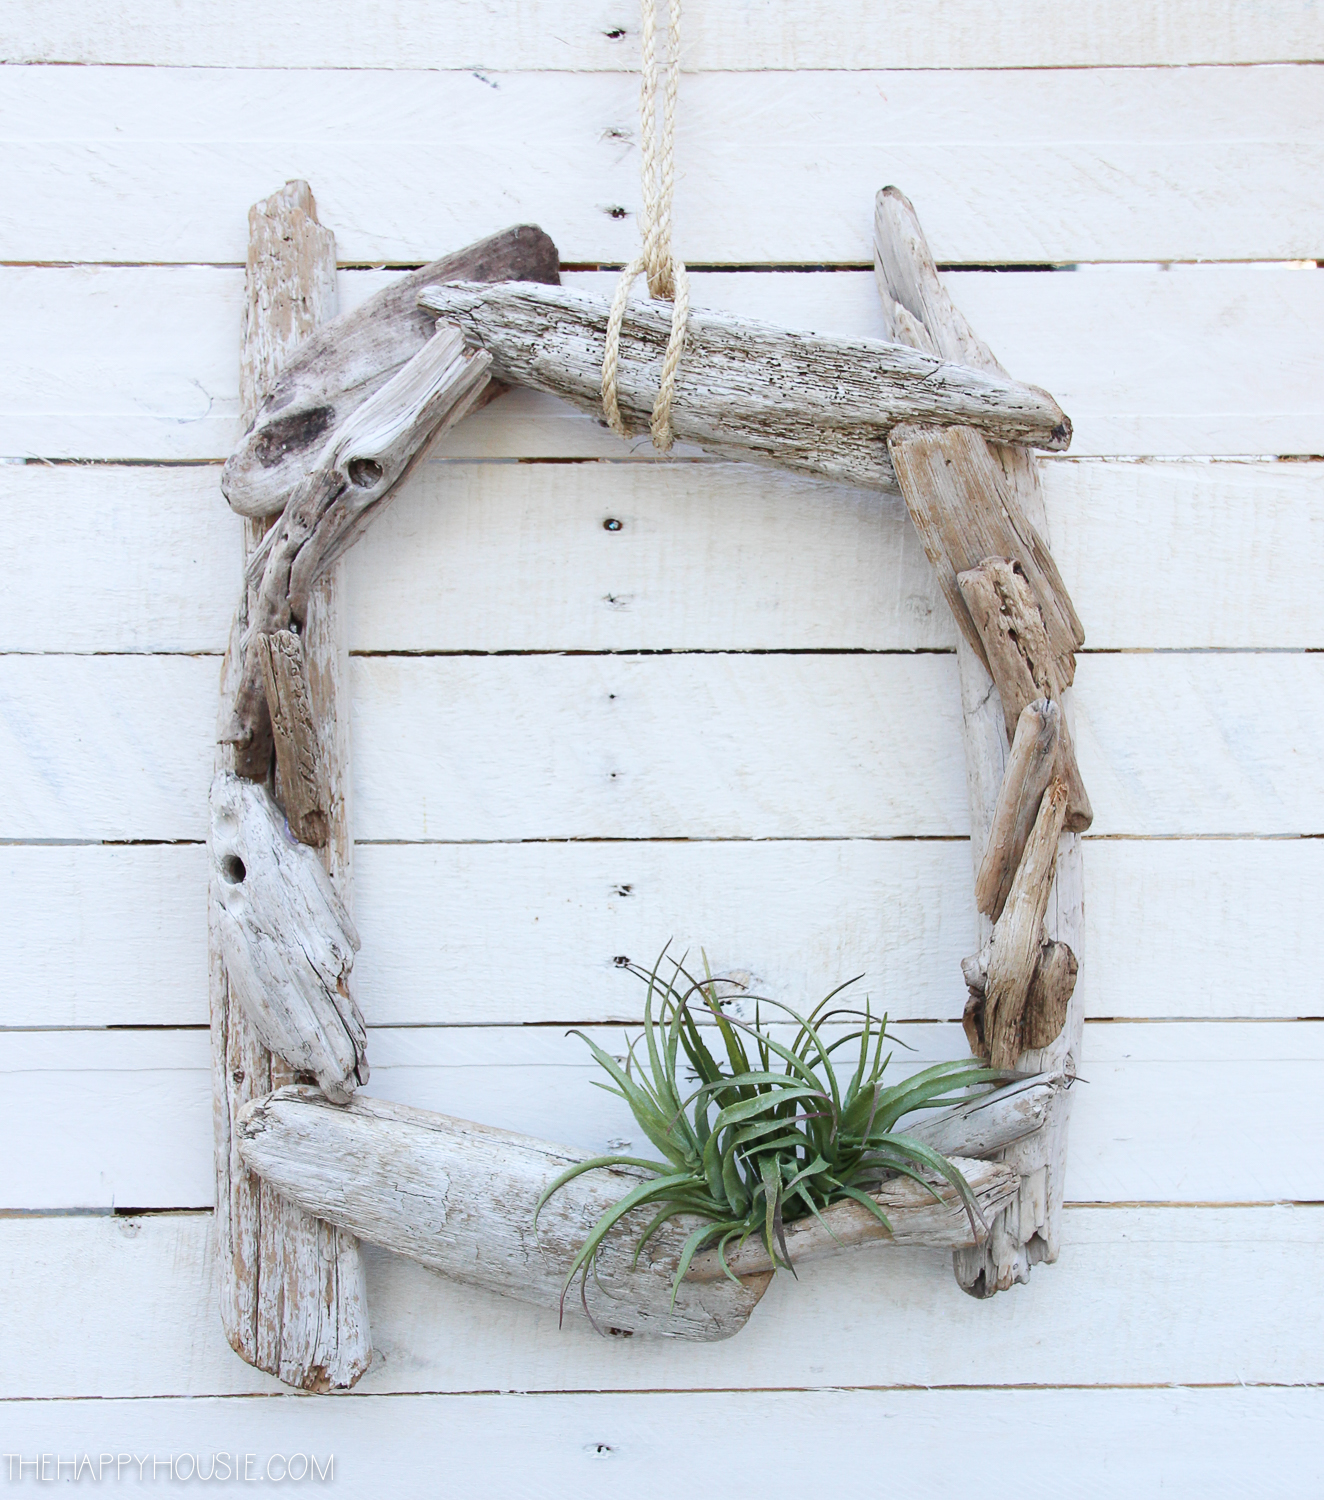 A driftwood wreath with a small succulent growing in it hanging on a wooden door.